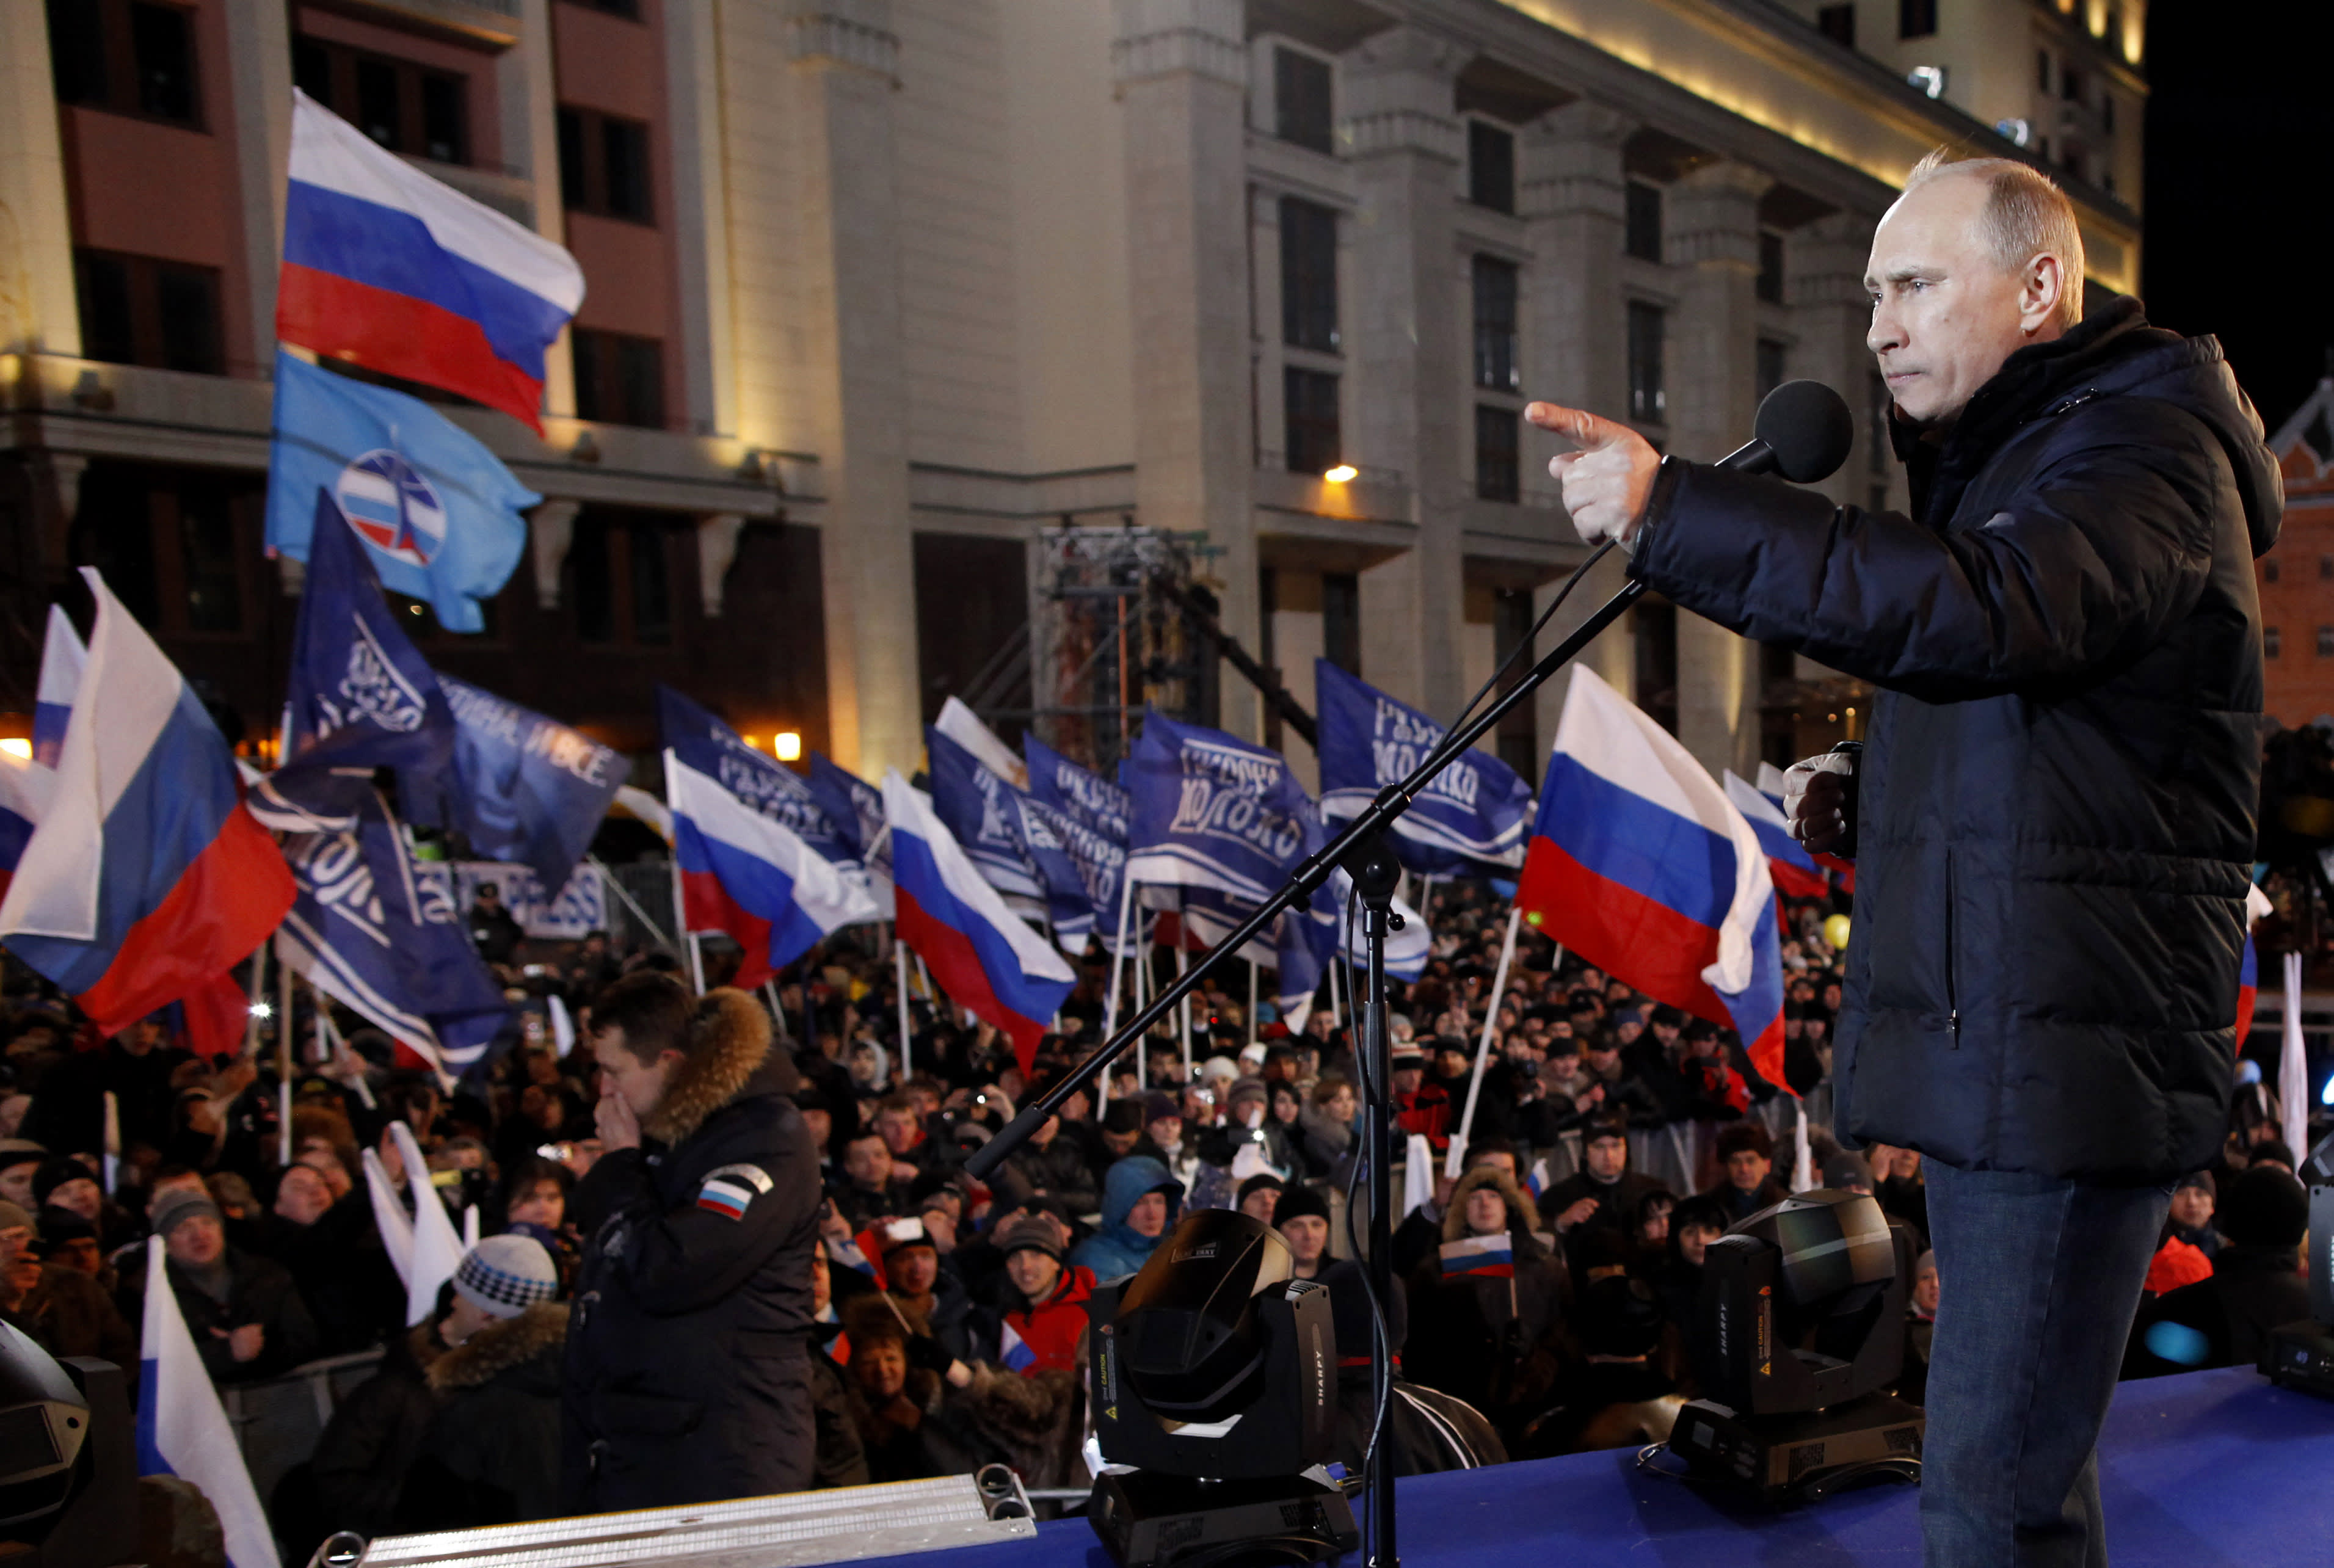 Putin’s invasion of Ukraine will knock the Russian economy back by 30 years